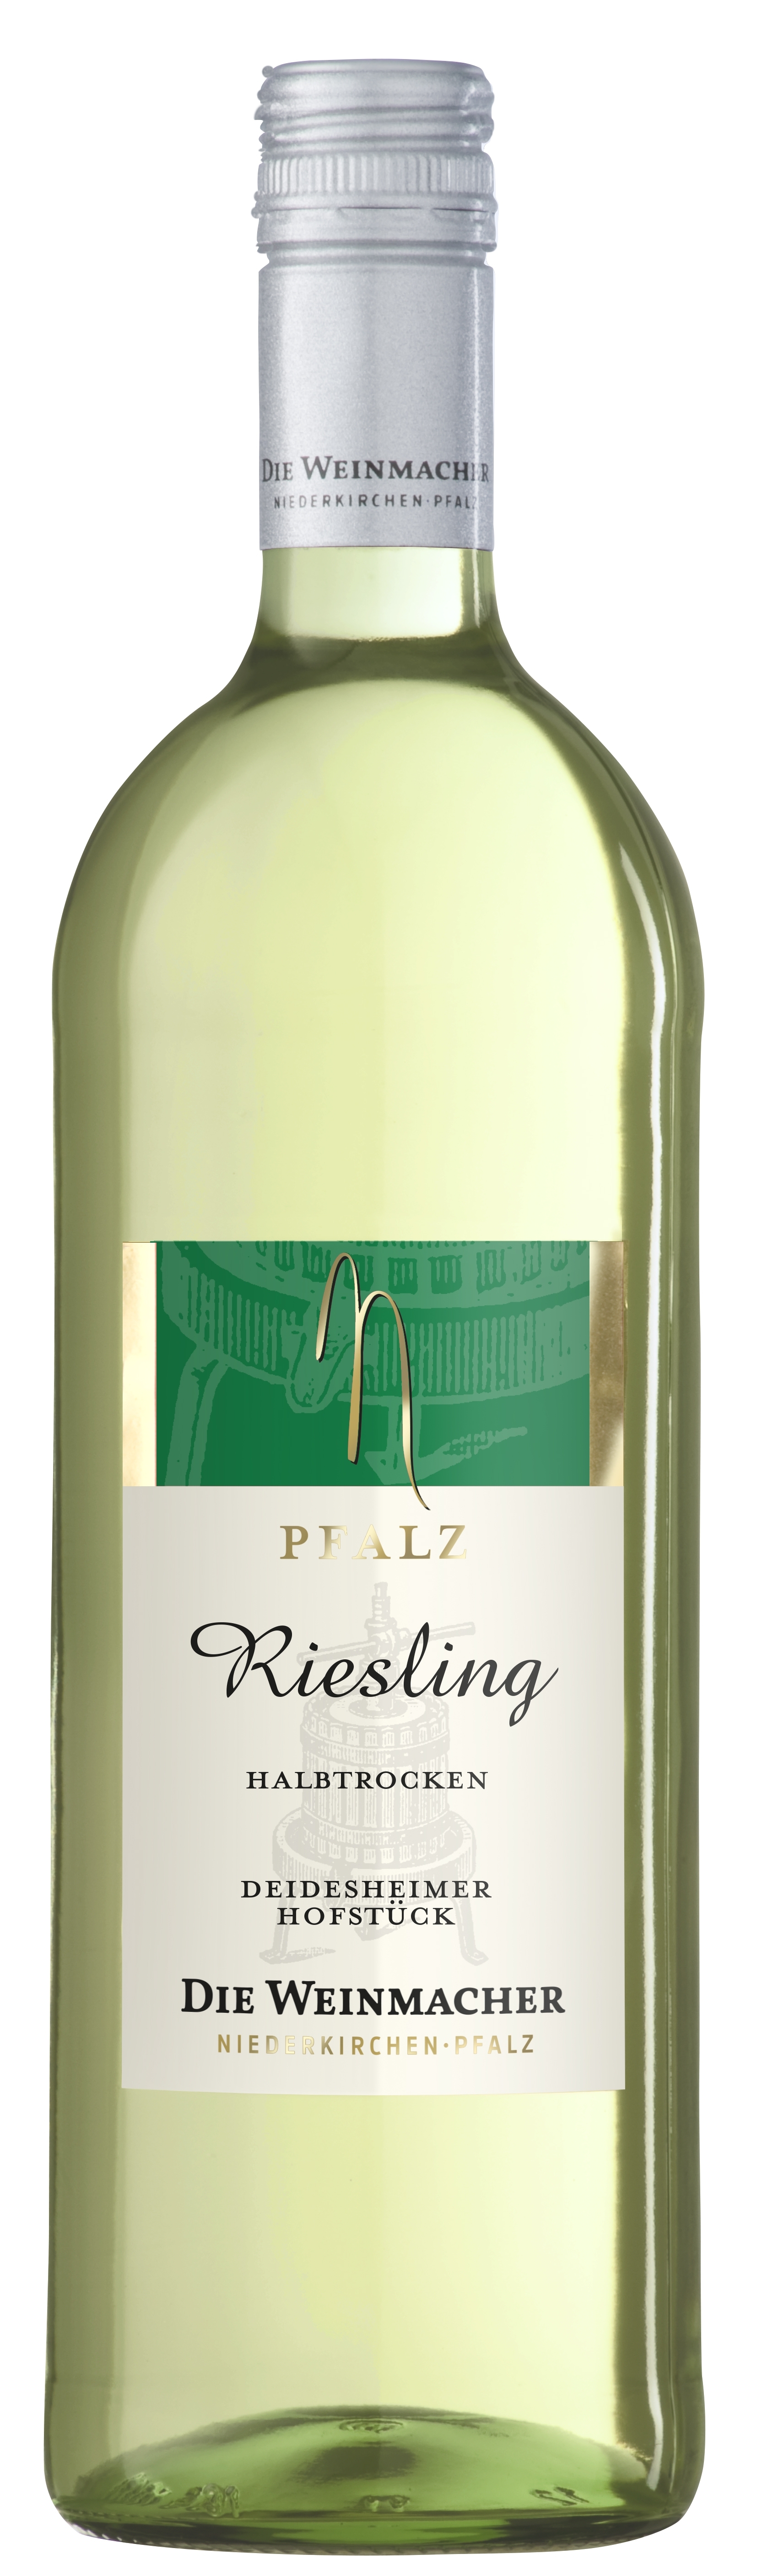 wein.plus Find+Buy: of The | members wein.plus wines Find+Buy our